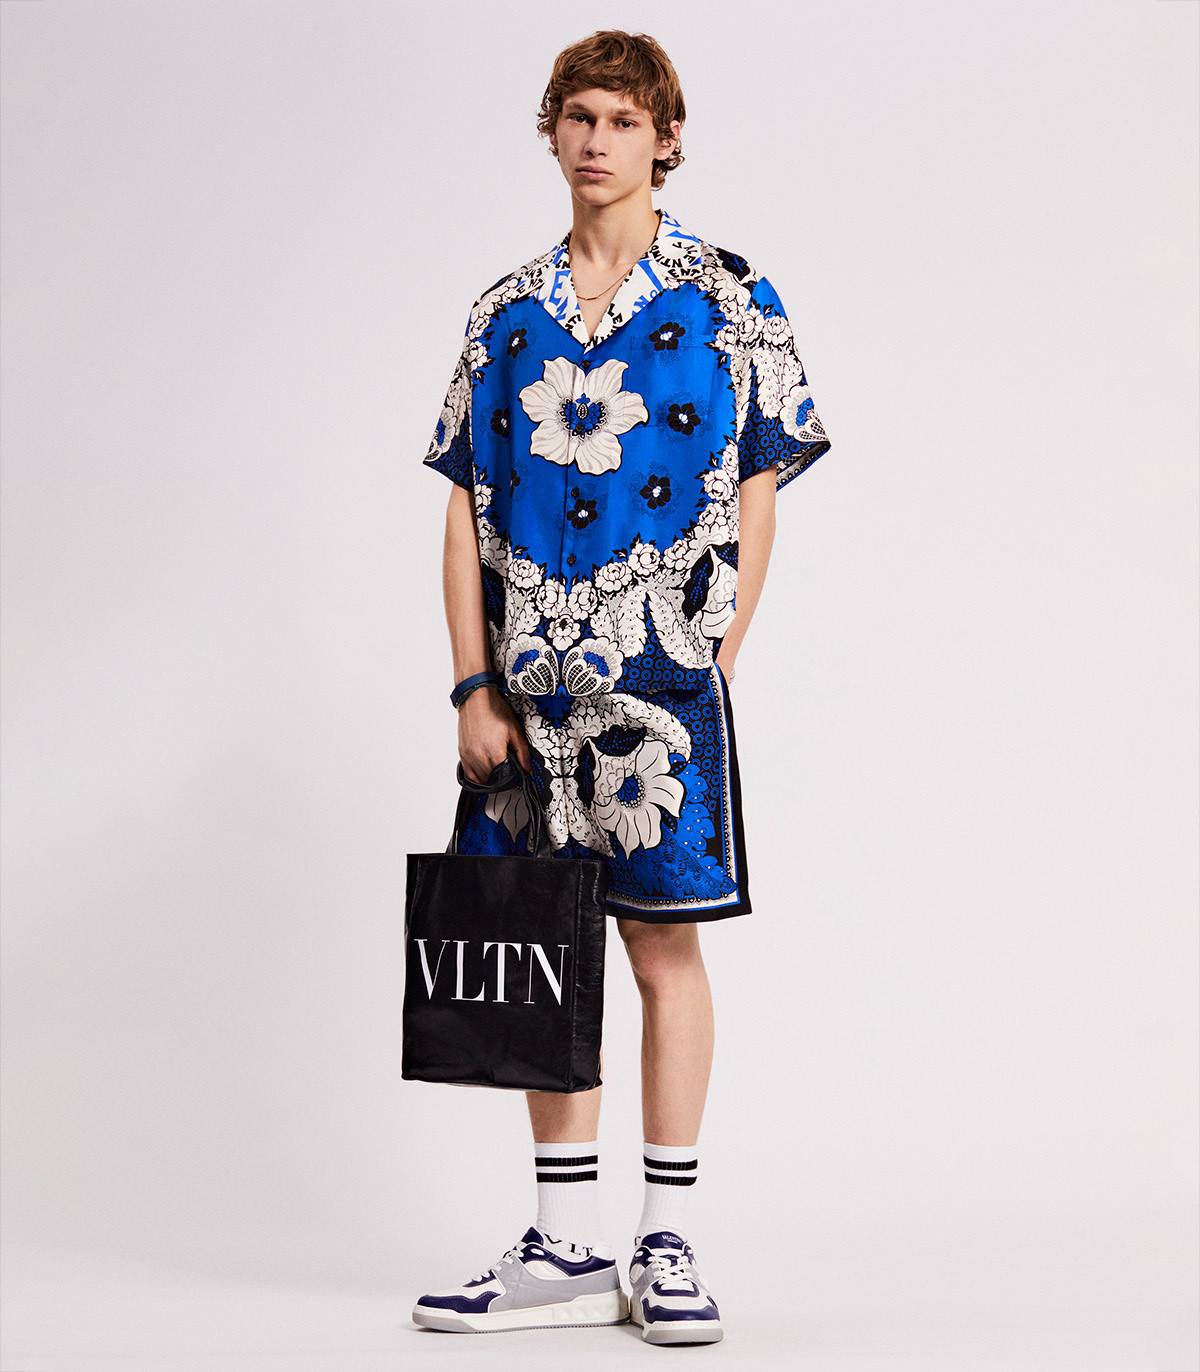 Valentino Online Boutique: the Maison Valentino official site